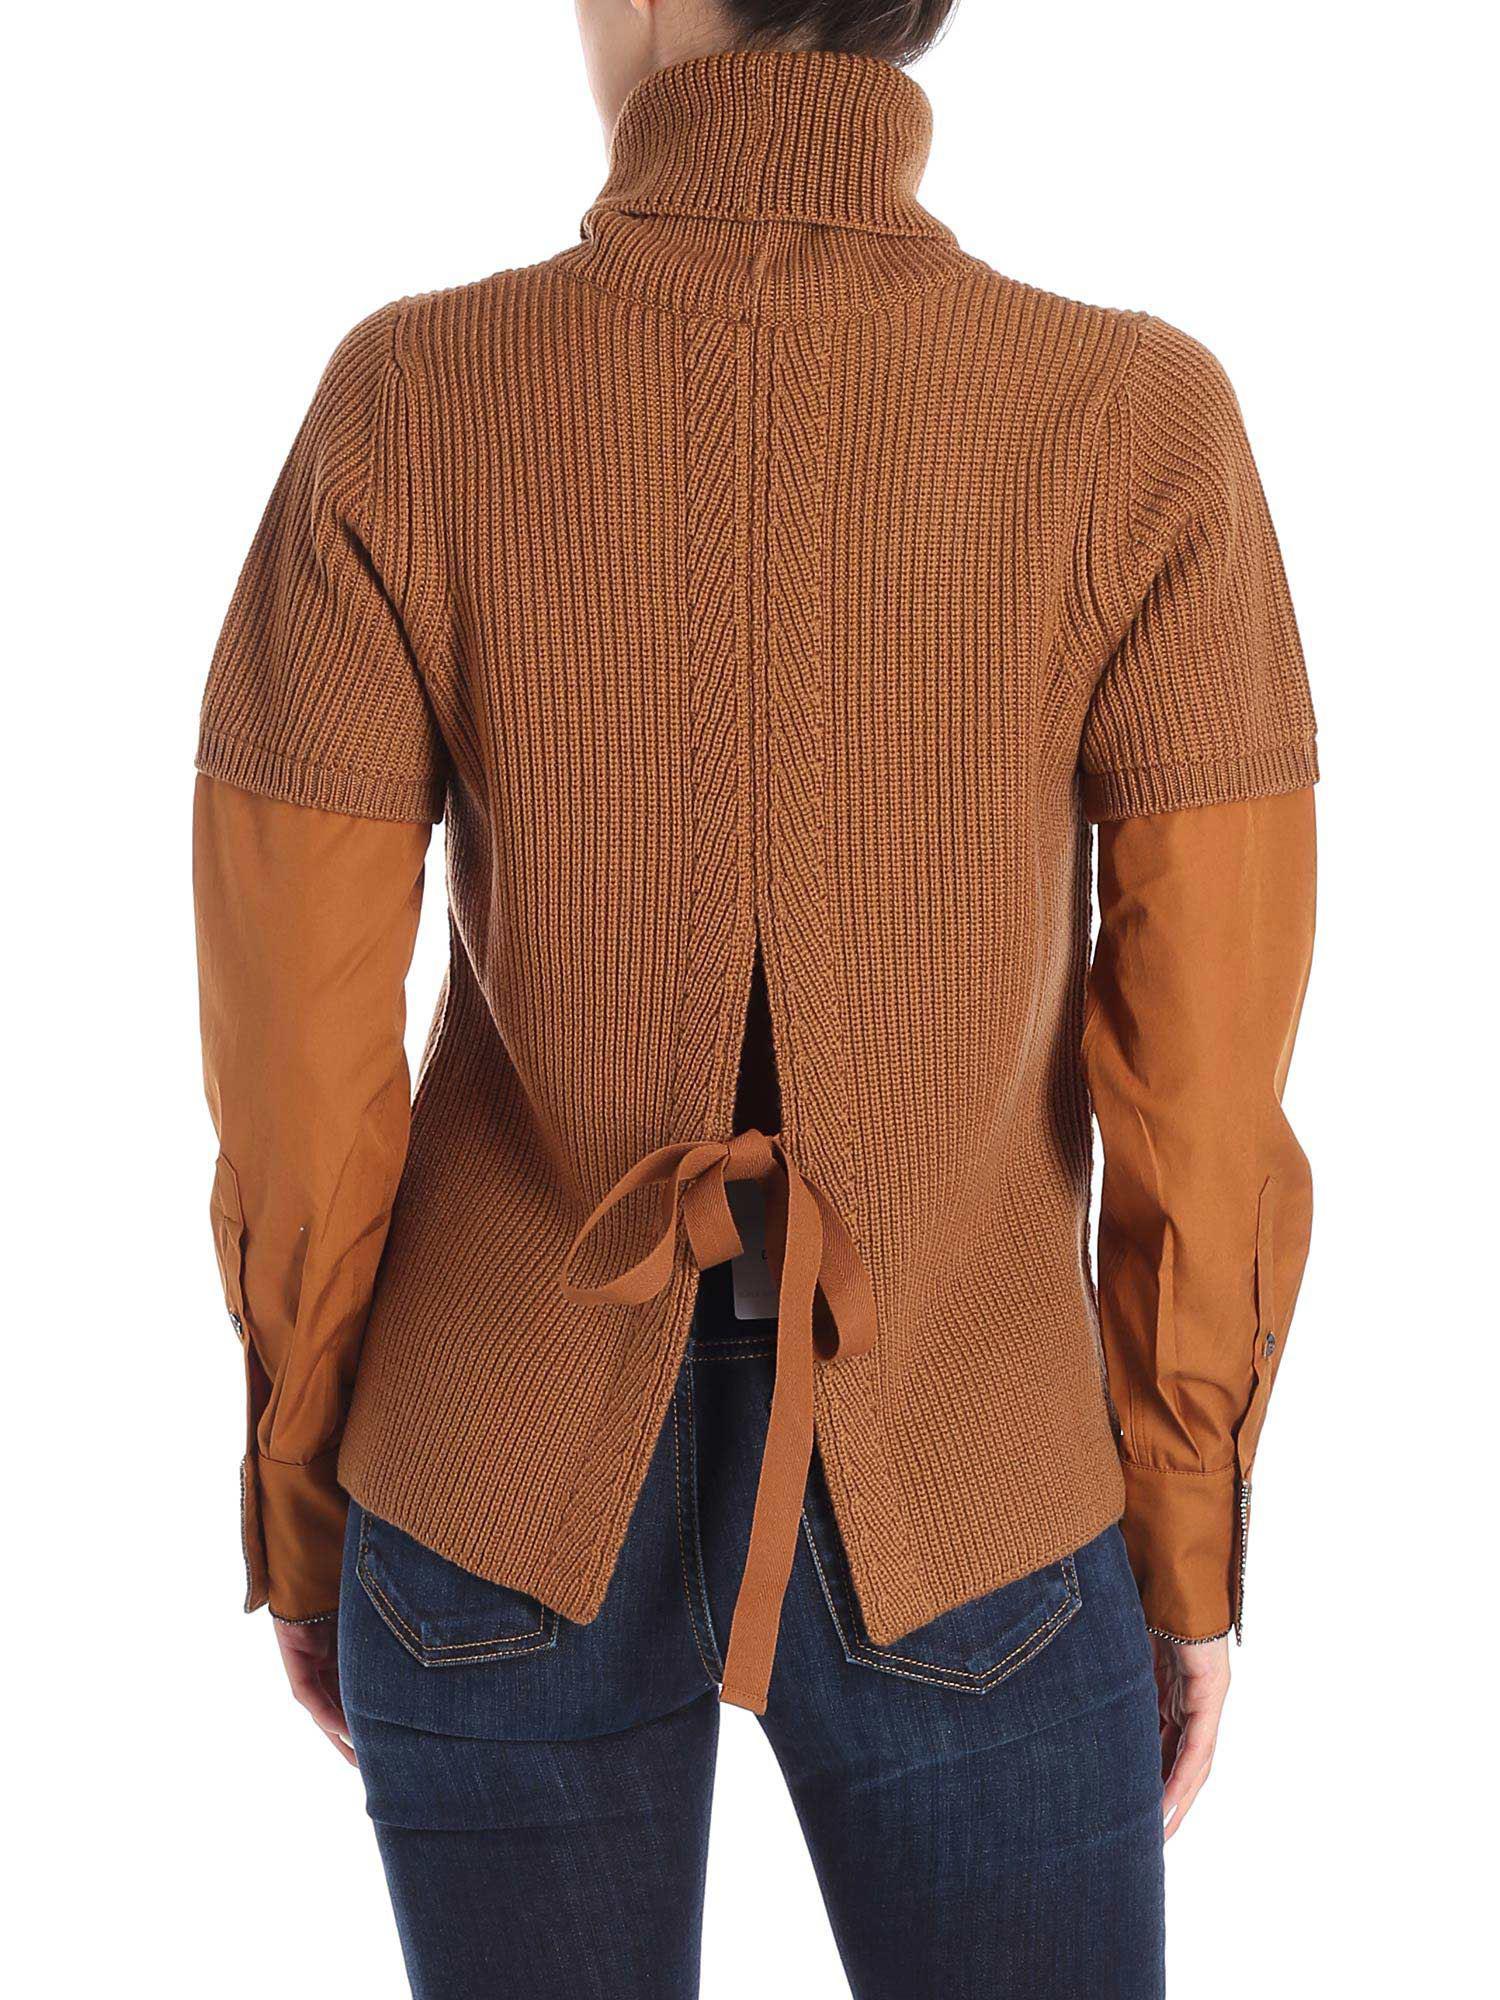 N°21 Wool Camel Color Turtleneck With Shirt Sleeves - Lyst